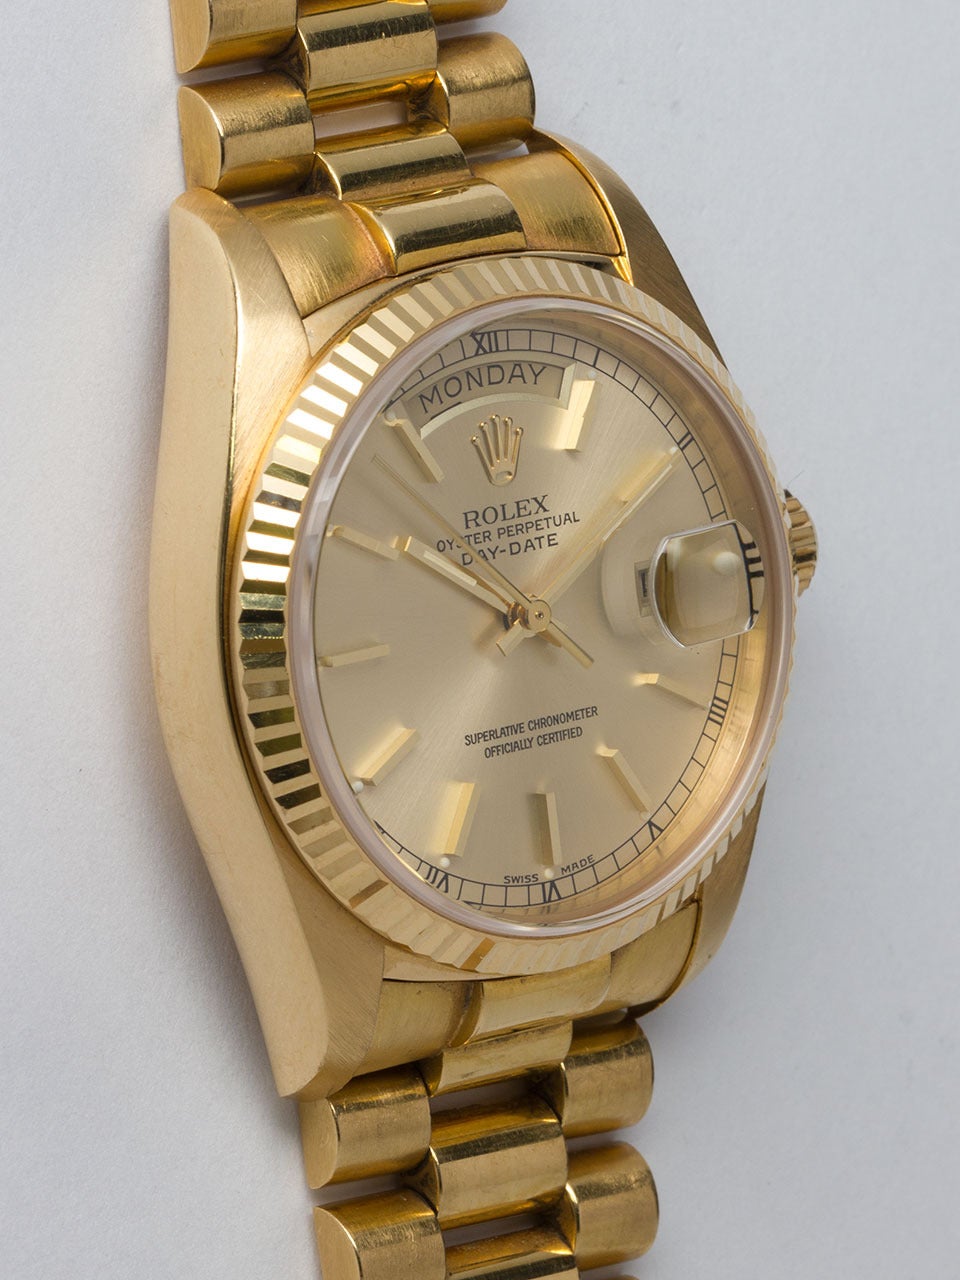 Rolex 18K Yellow Gold Day Date Wristwatch ref 18038 serial #5.2 million circa 1978. Super sharp condition 36mm diameter full size man's model with beefy lugs, fluted bezel and sapphire crystal. Original champagne dial with applied gold indexes and